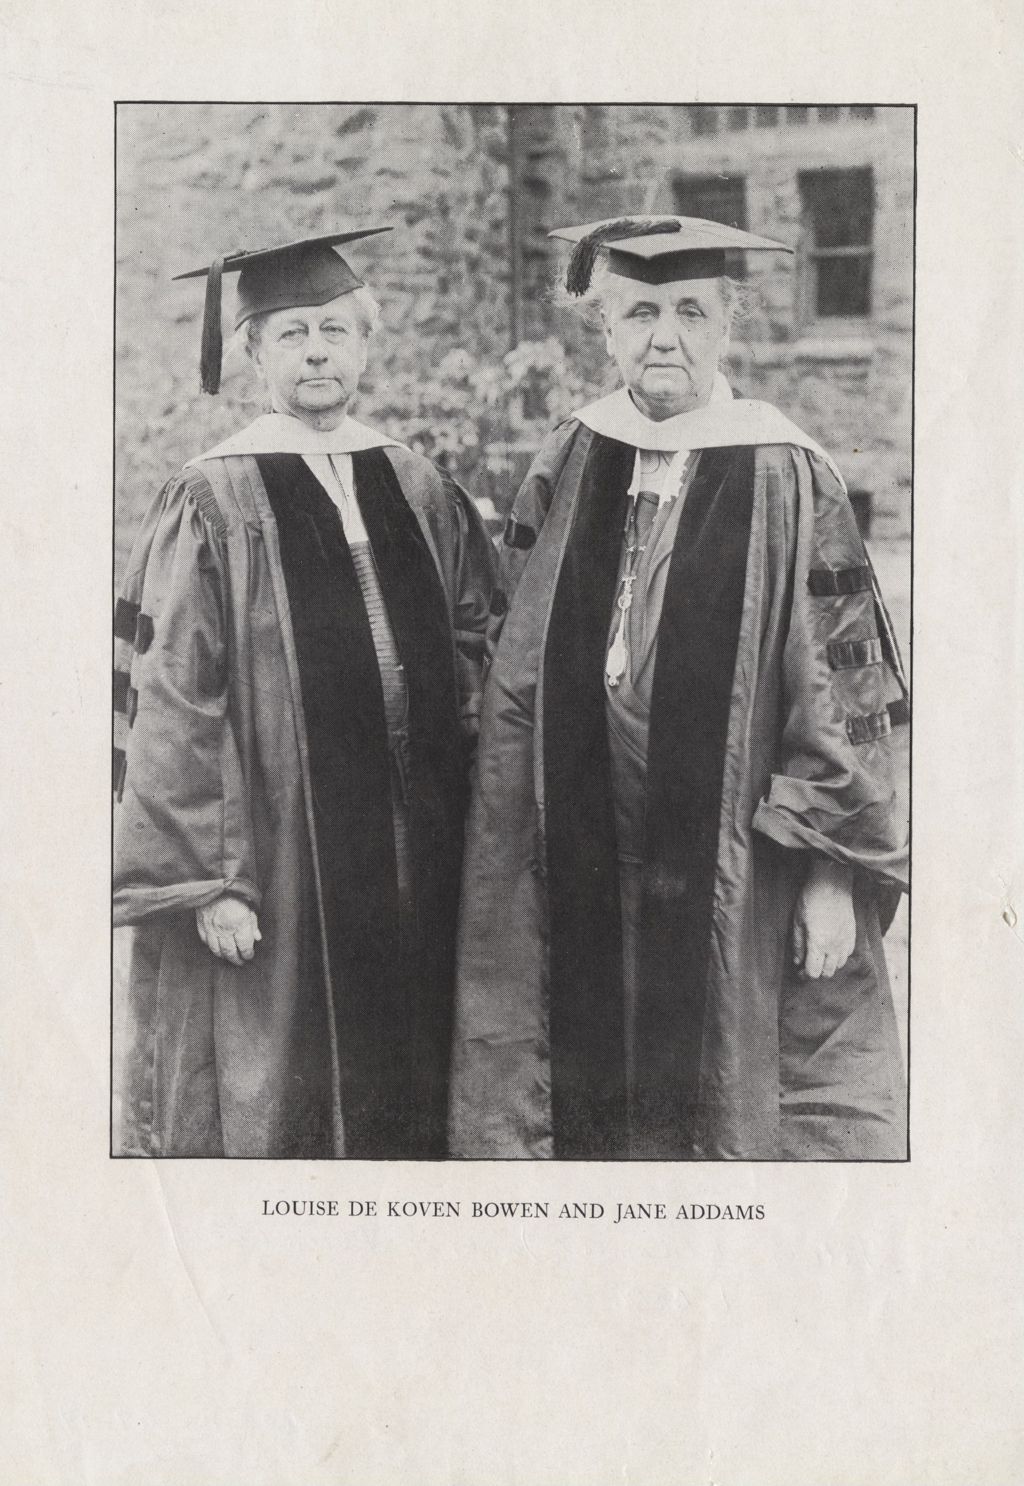 Miniature of Louise De Koven Bowen and Jane Addams receiving Honorary Degrees